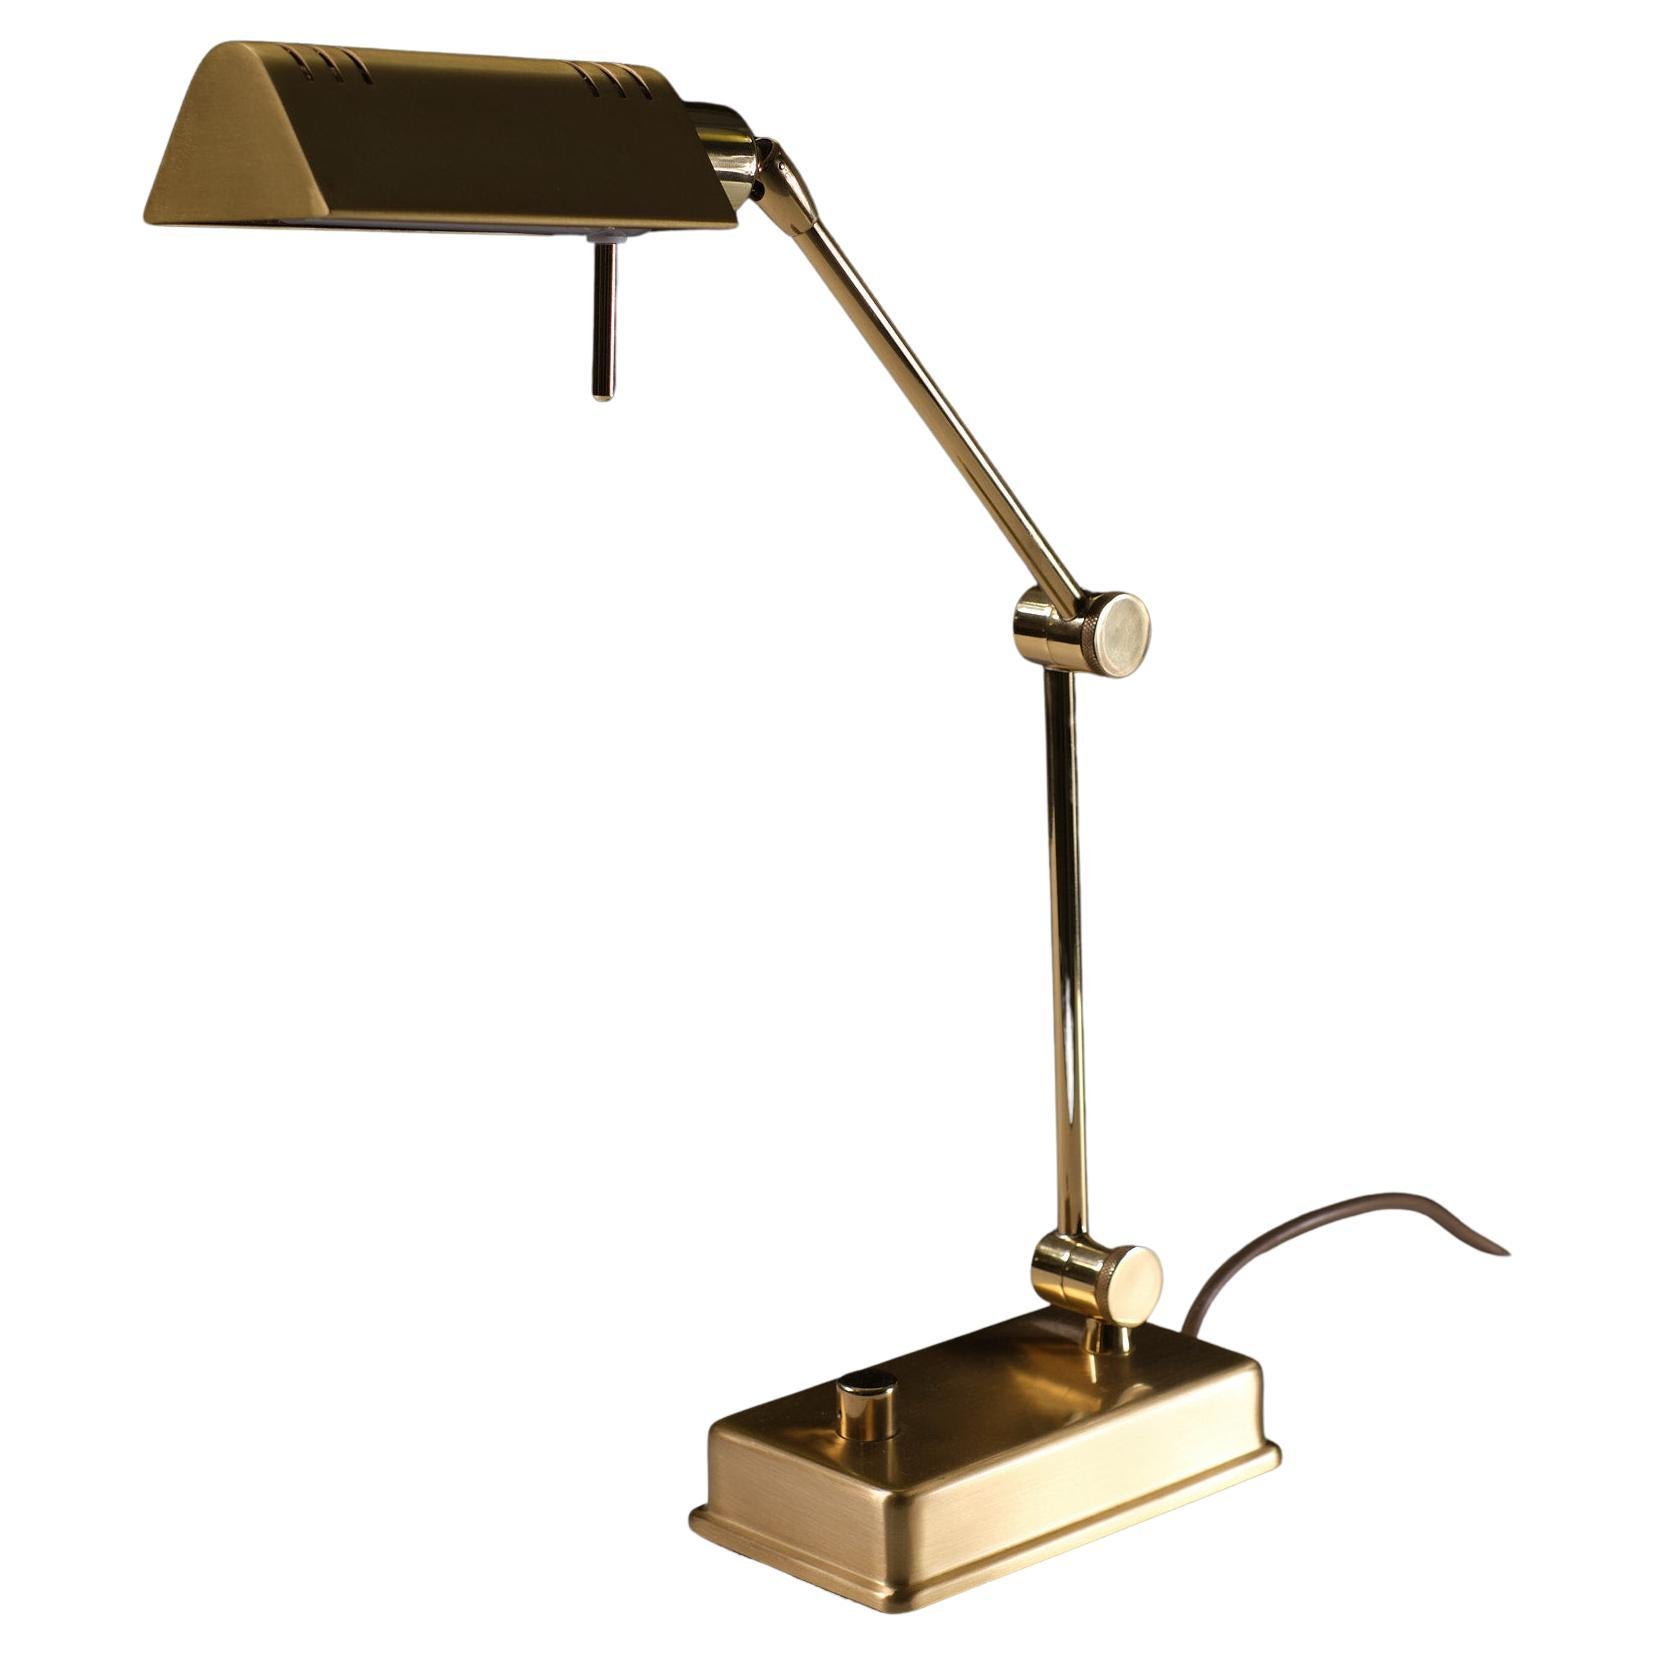 Beautiful Holtkoetter Desk lamp . Rose Gold Brass color .Halogen .Build in dimmer 
Top quality from Germany .signed . 1970s   